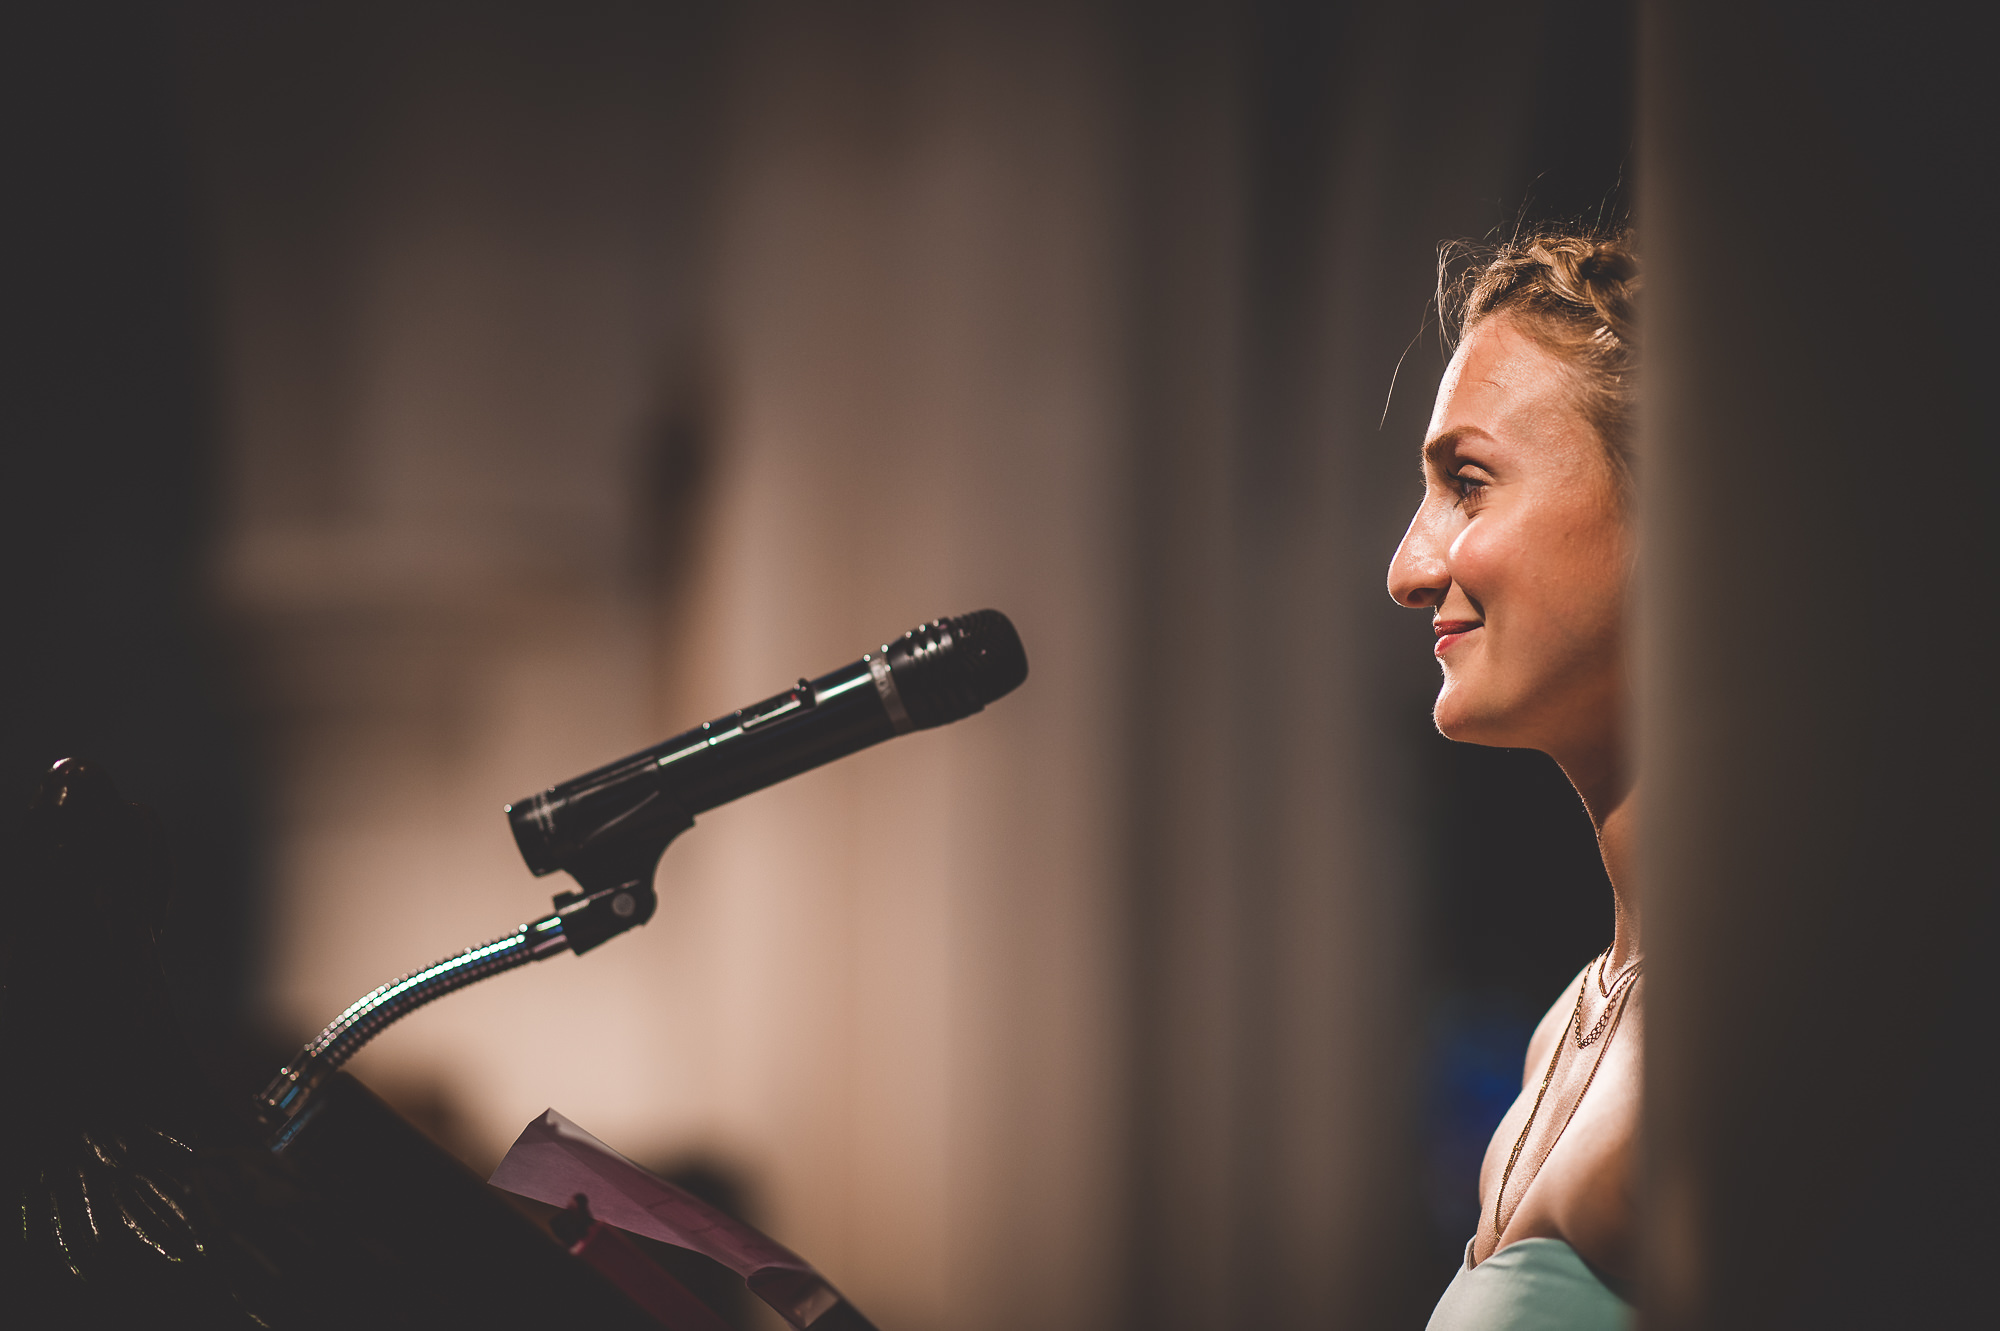 A wedding photographer captures a woman speaking into a microphone during a wedding ceremony.